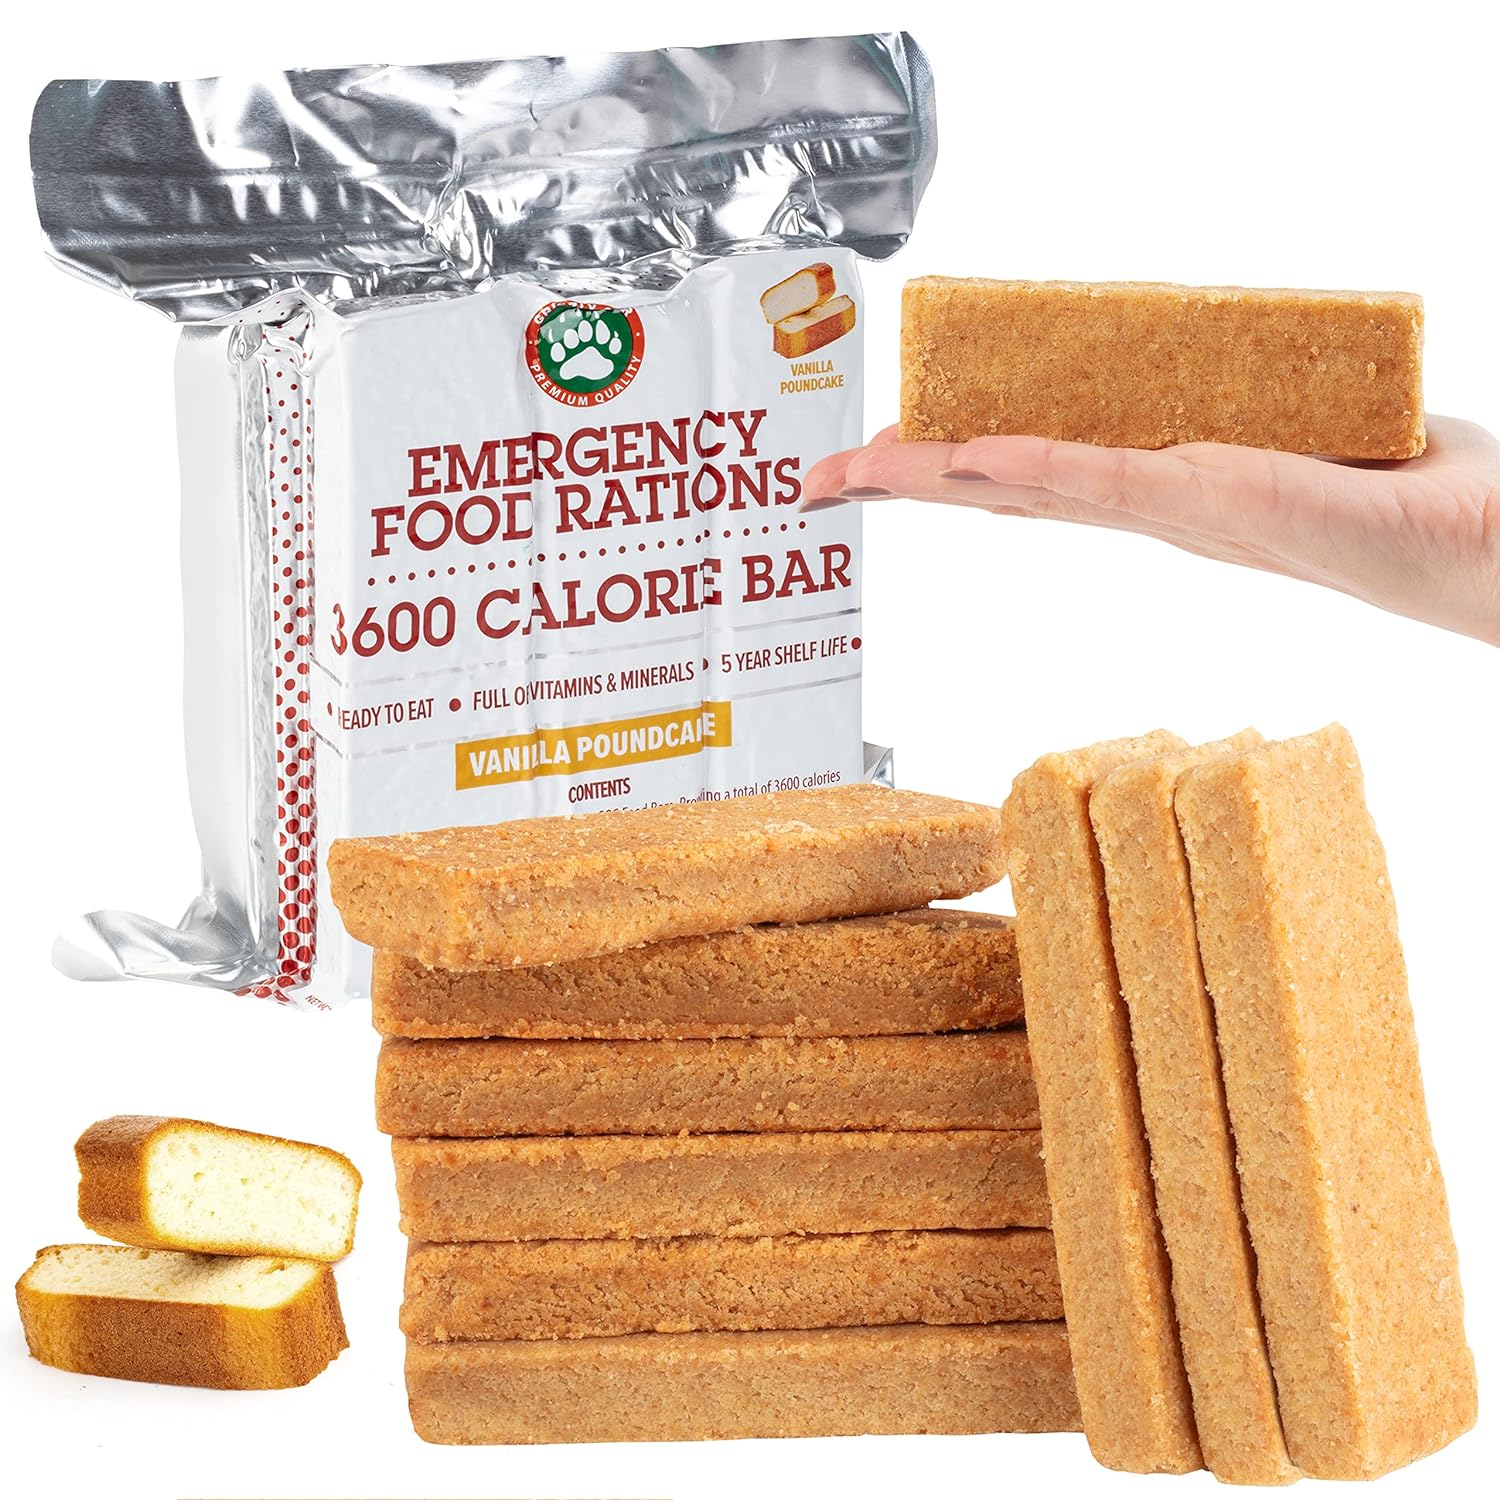 Emergency Food Rations- 3600 Calorie Bar (Vanilla Poundcake) - 3 Day, 72 Hour Ready To Eat Supply For Disaster, Hurricane, Flood Preparedness - Non Thirst Provoking - 5 Year Shelf Life